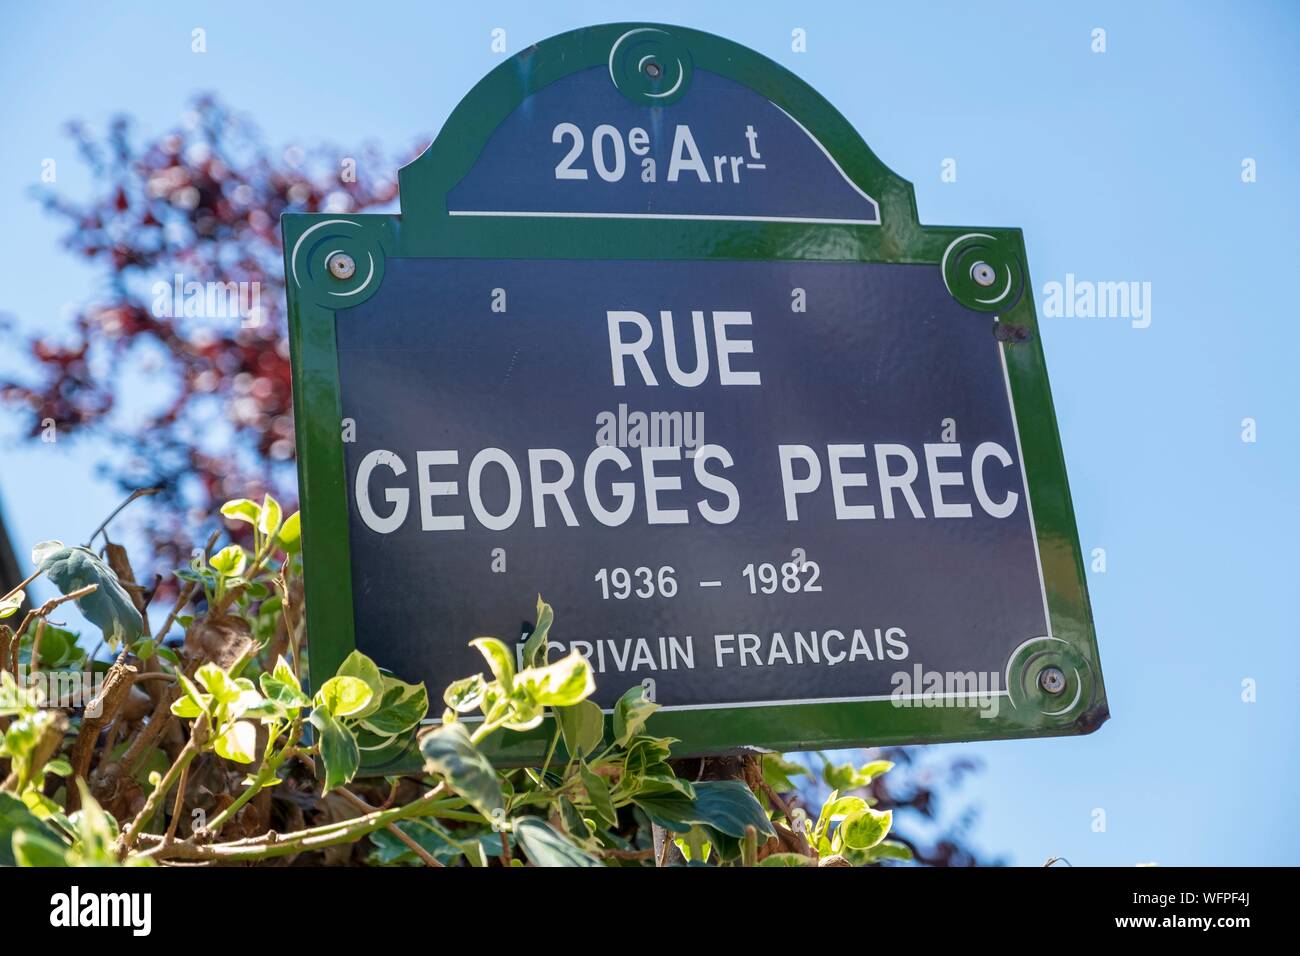 Georges perec hi-res stock photography and images picture